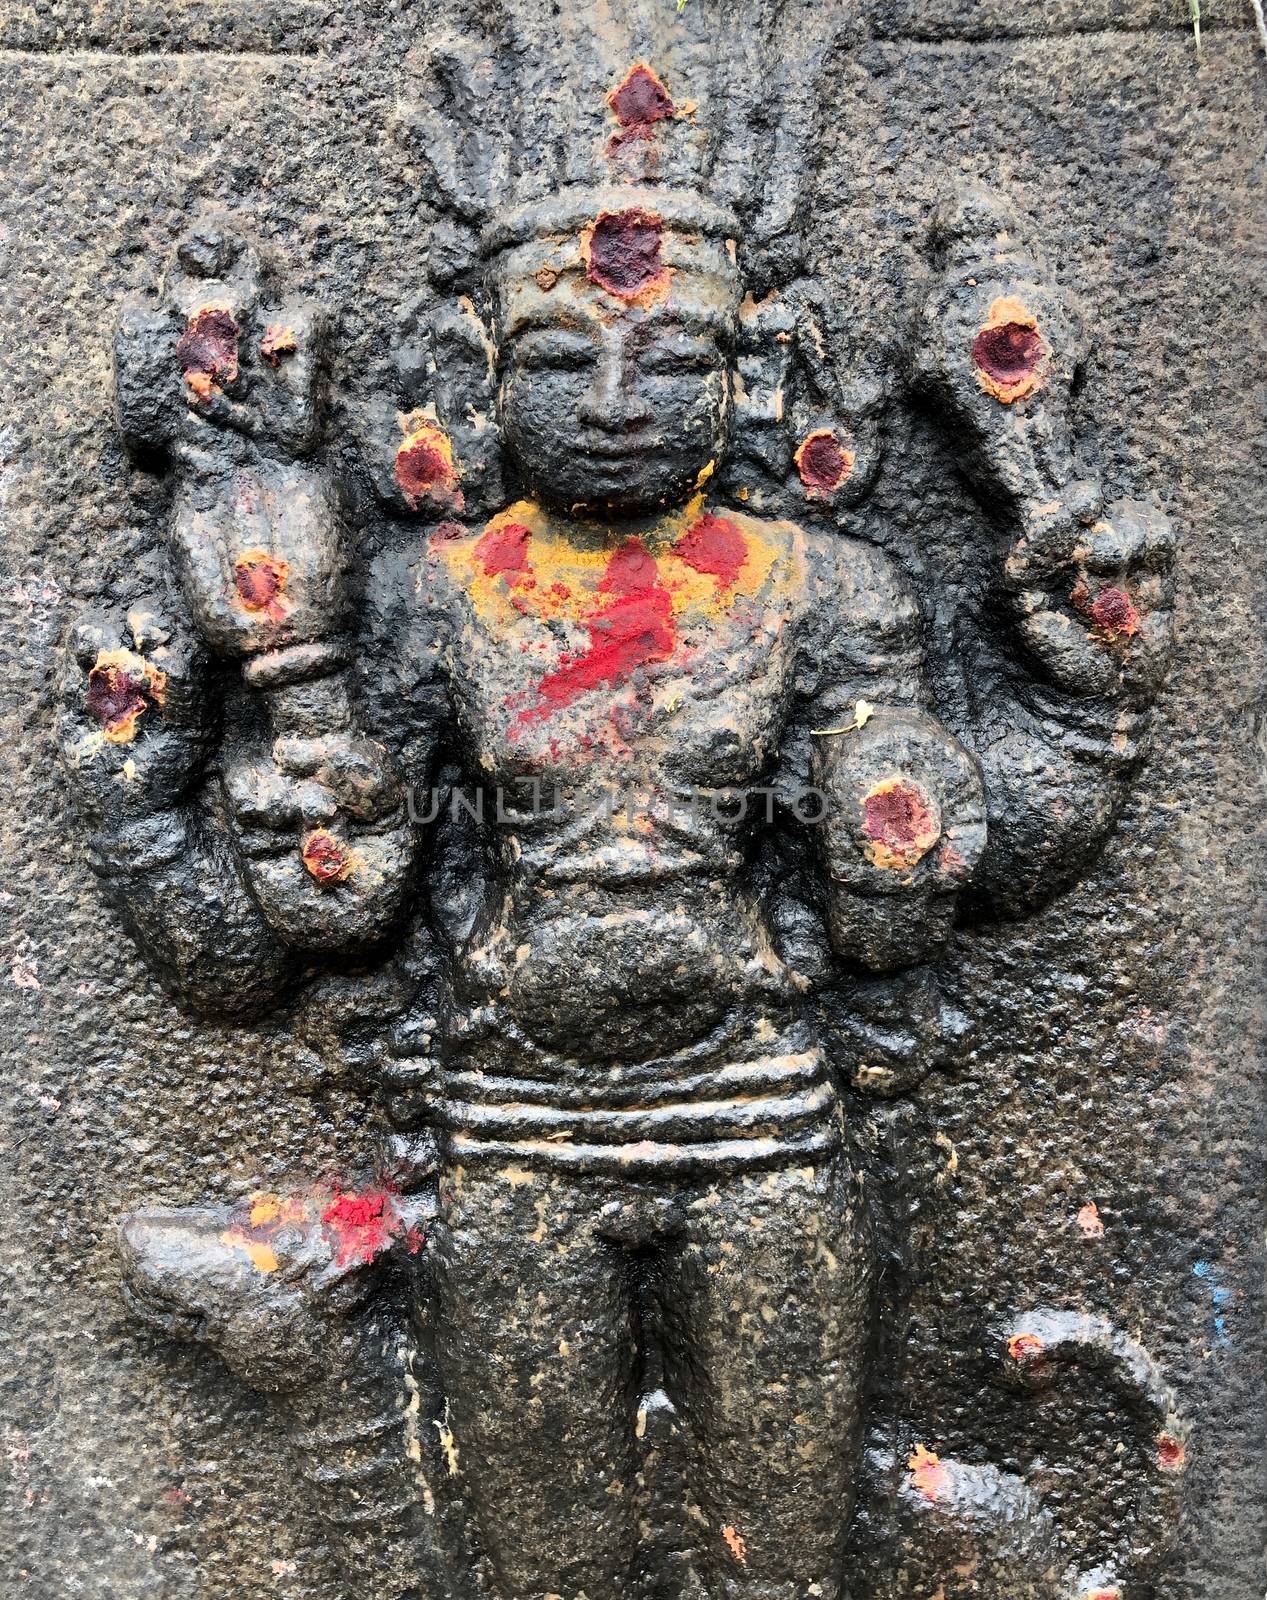 God sculpture with decorations during festival. Bas relief sculpture carved in the stone walls at Shiva temple in Tamil nadu by prabhakaran851